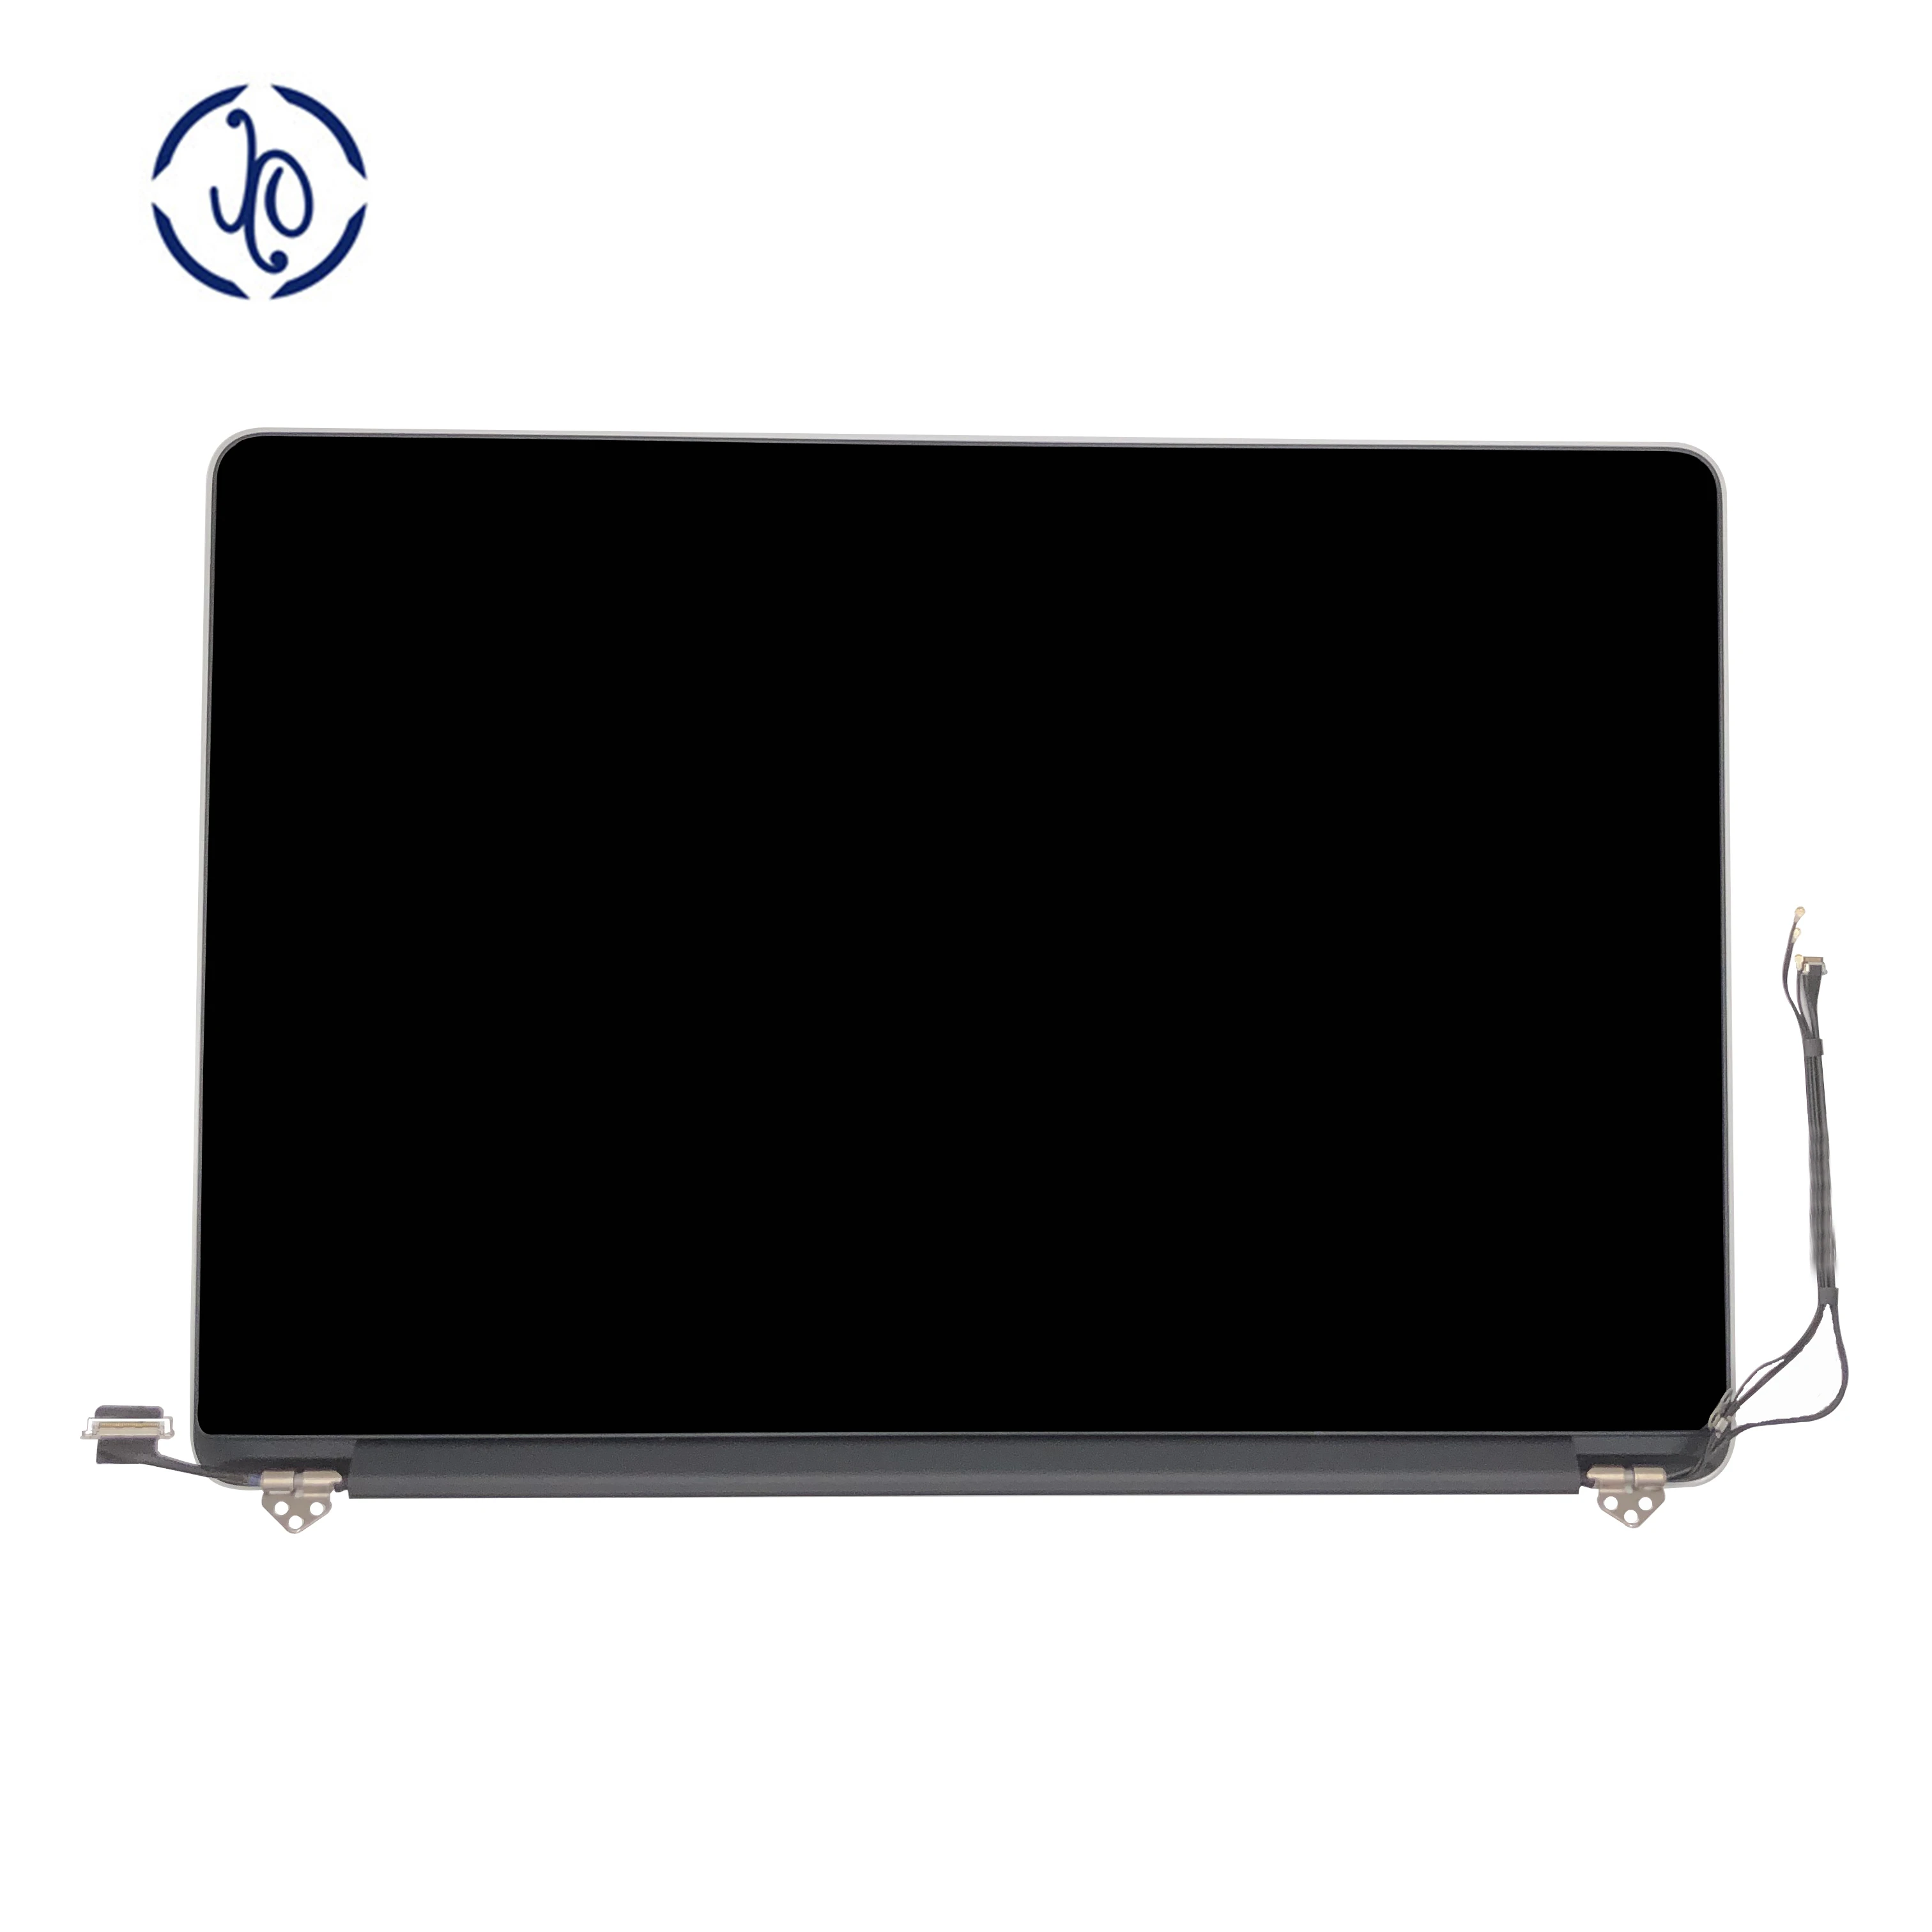 98% New A1398 LCD Screen Display Assembly For Macbook Pro Retina 15 A1398 ME293 ME294 MGXA2 MGXC2 Late 2013 / Mid 2014